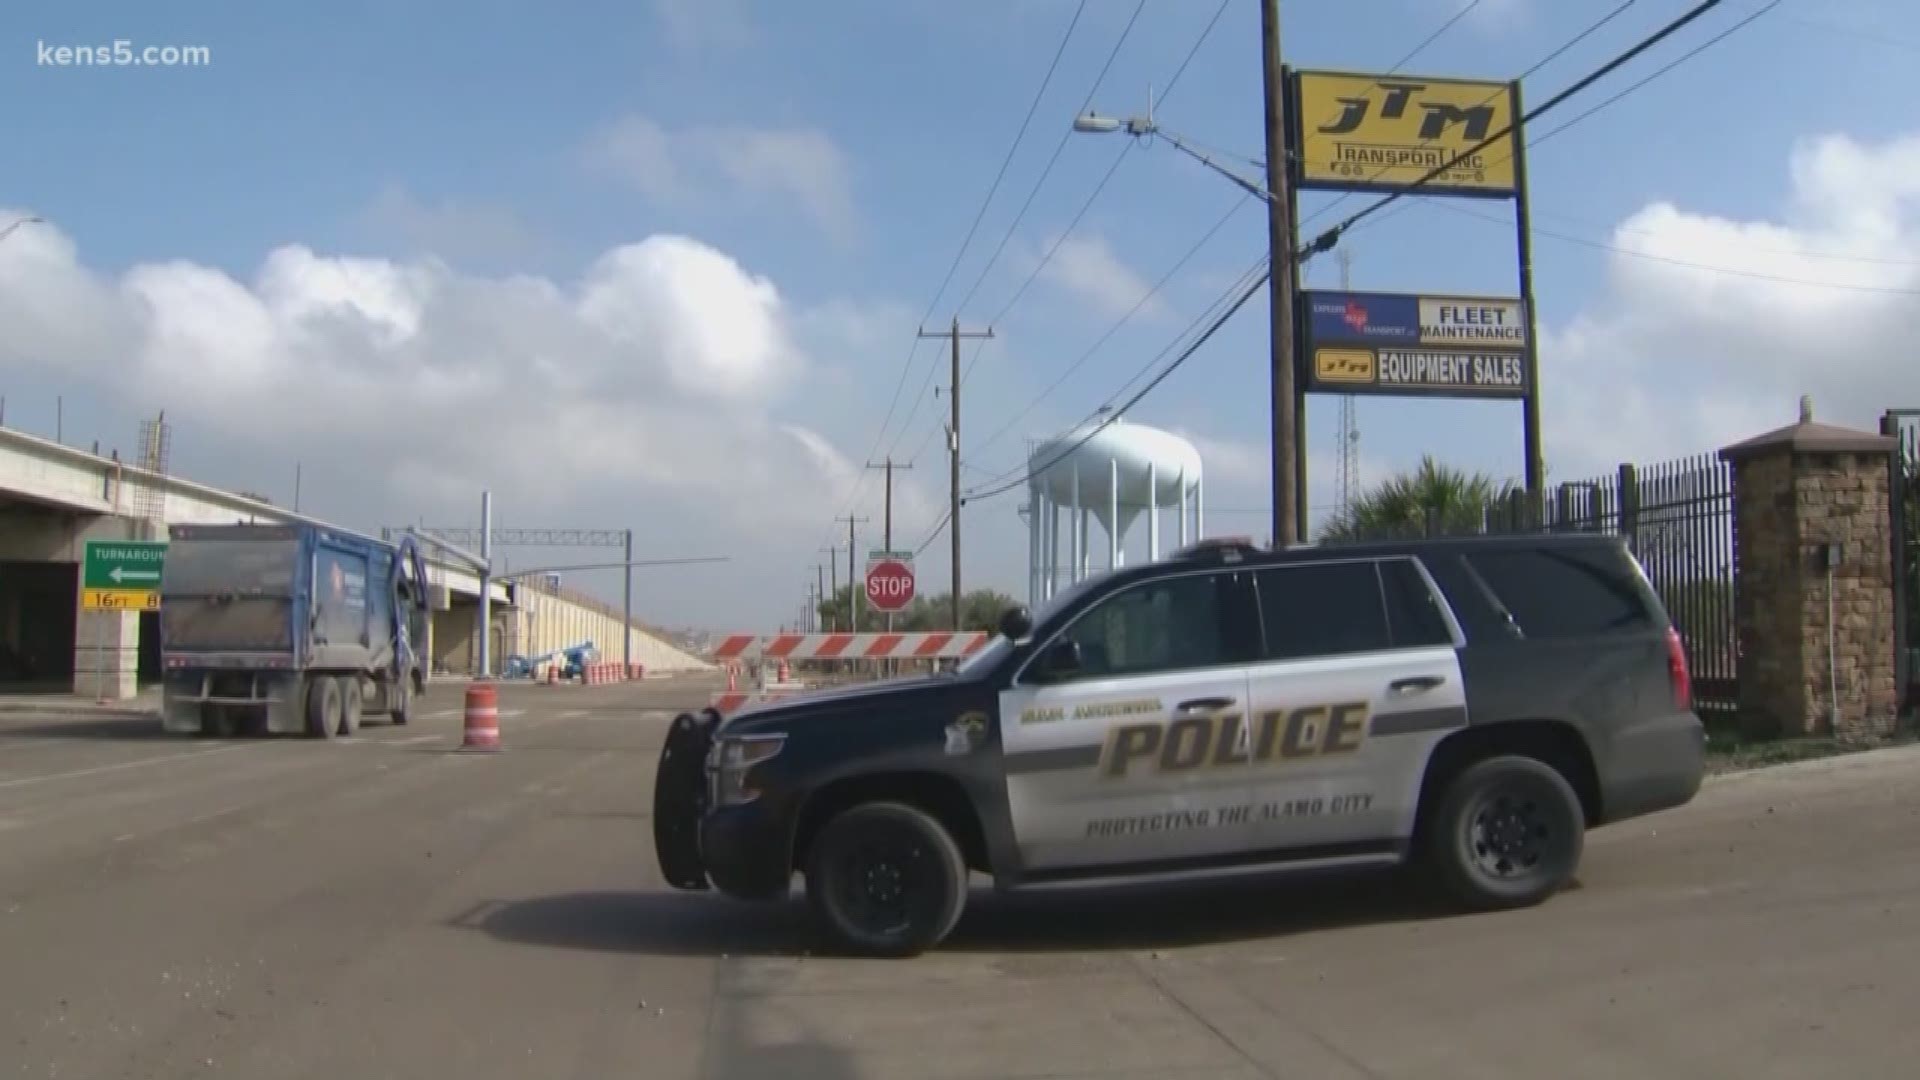 San Antonio Police later found the suspected gunman dead from a self-inflicted gunshot wound.